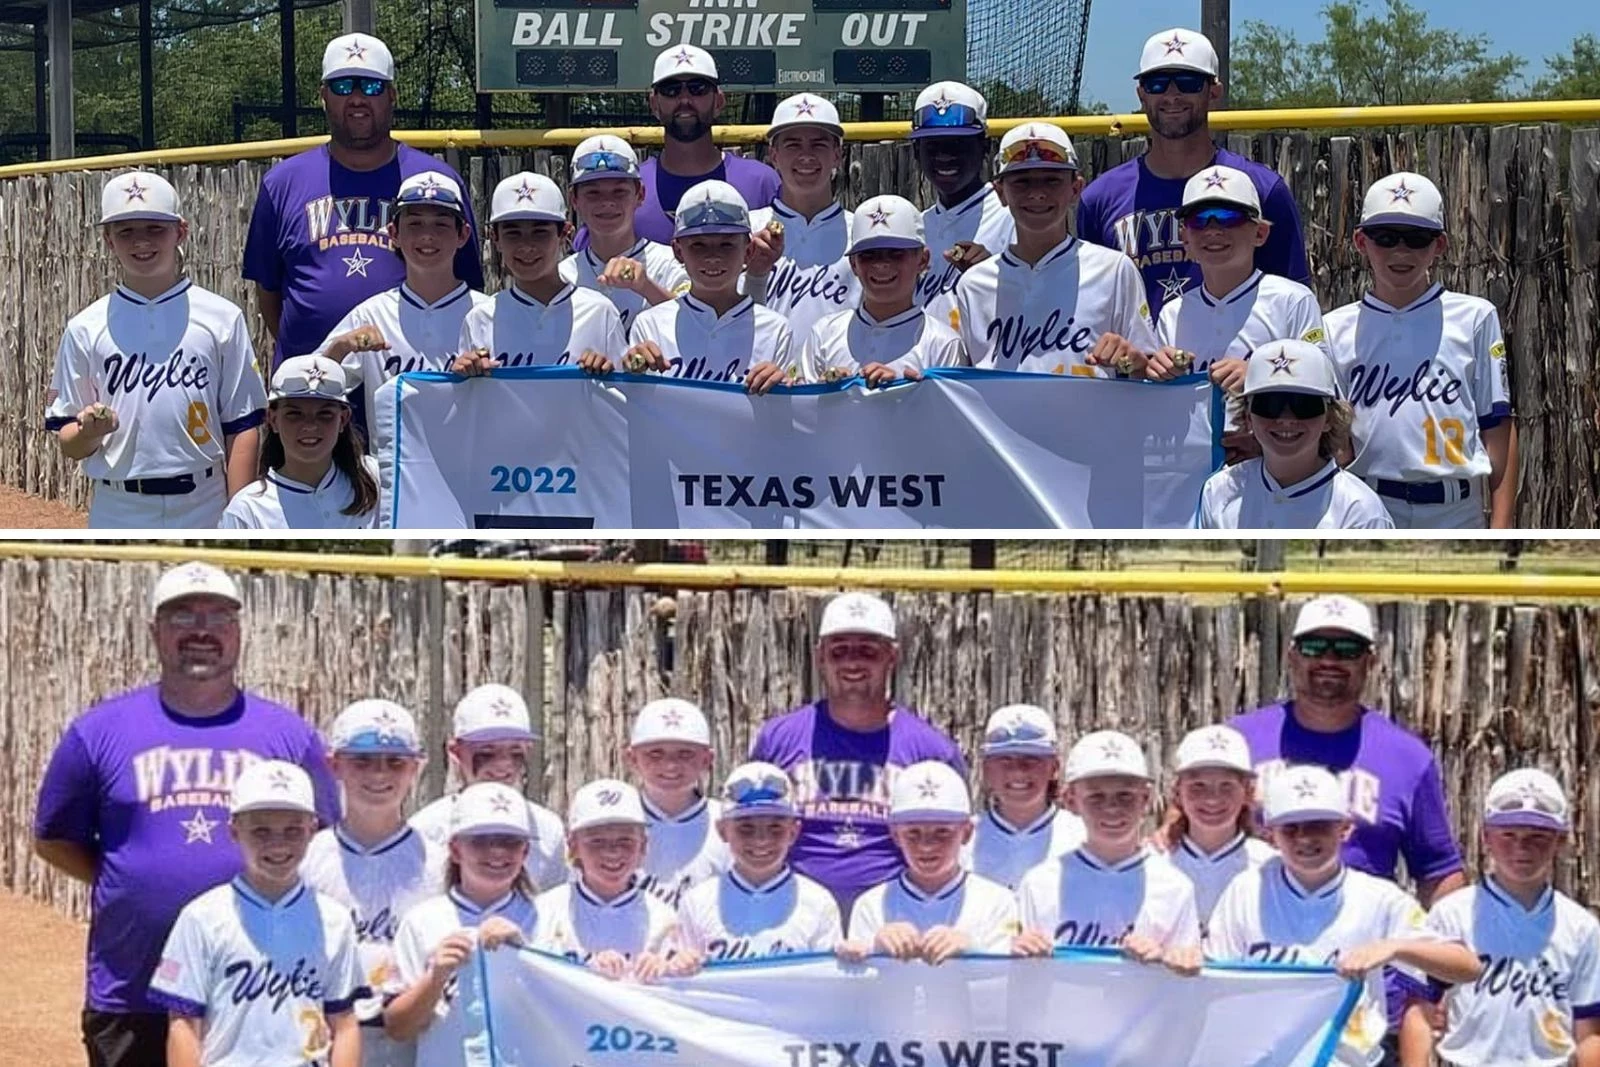 Wylie Little League's run at the World Series ends, families, kids